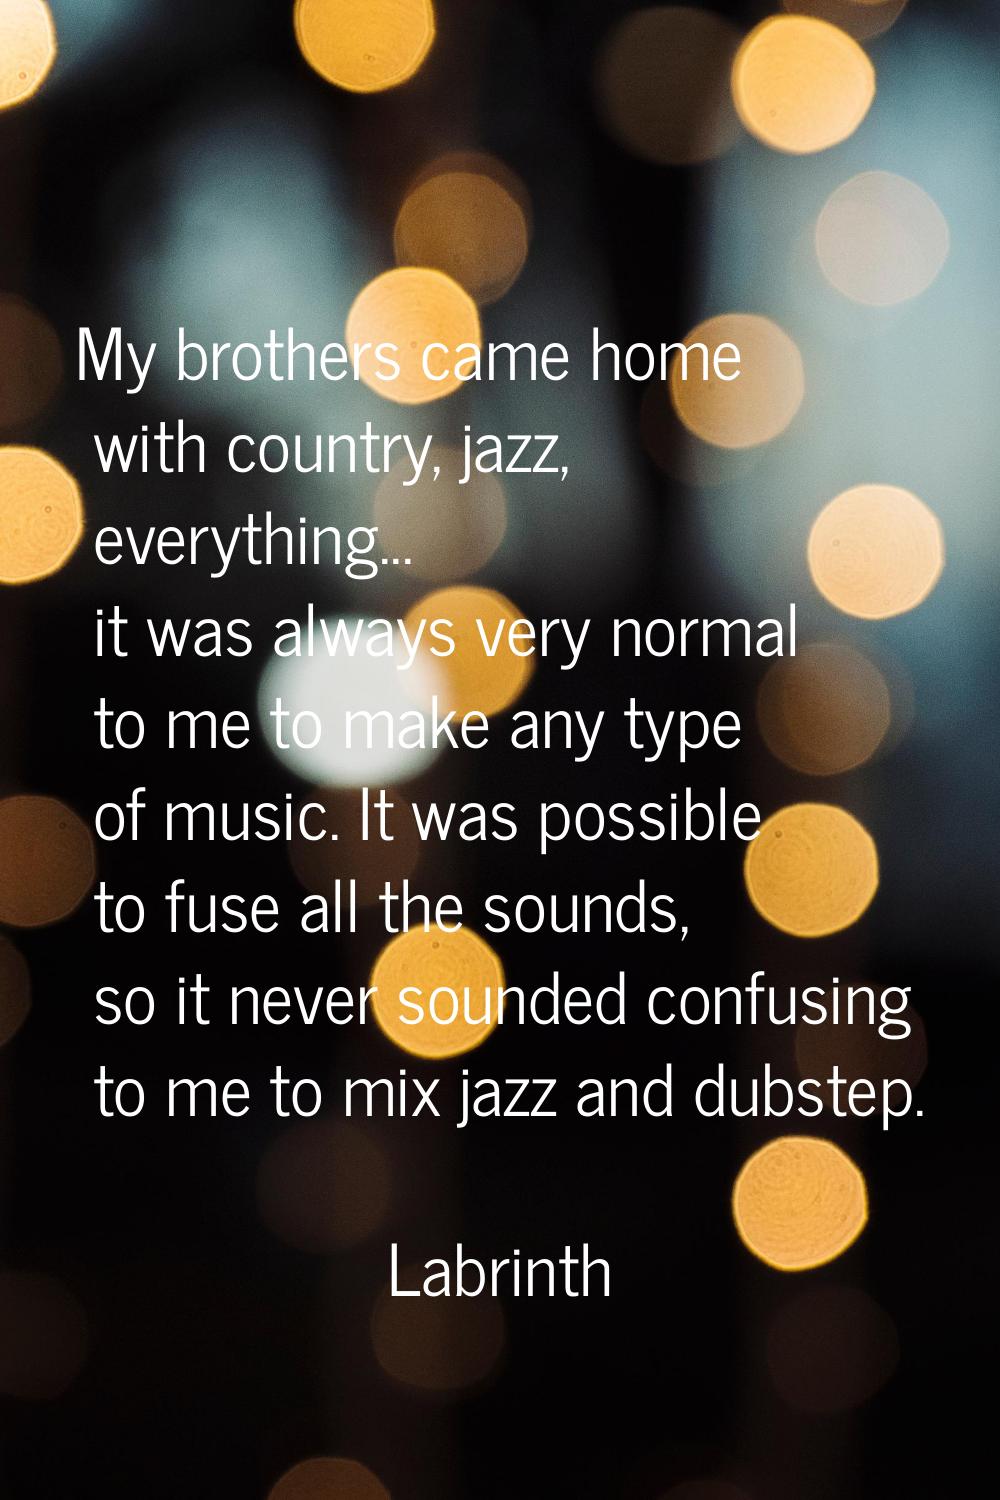 My brothers came home with country, jazz, everything... it was always very normal to me to make any